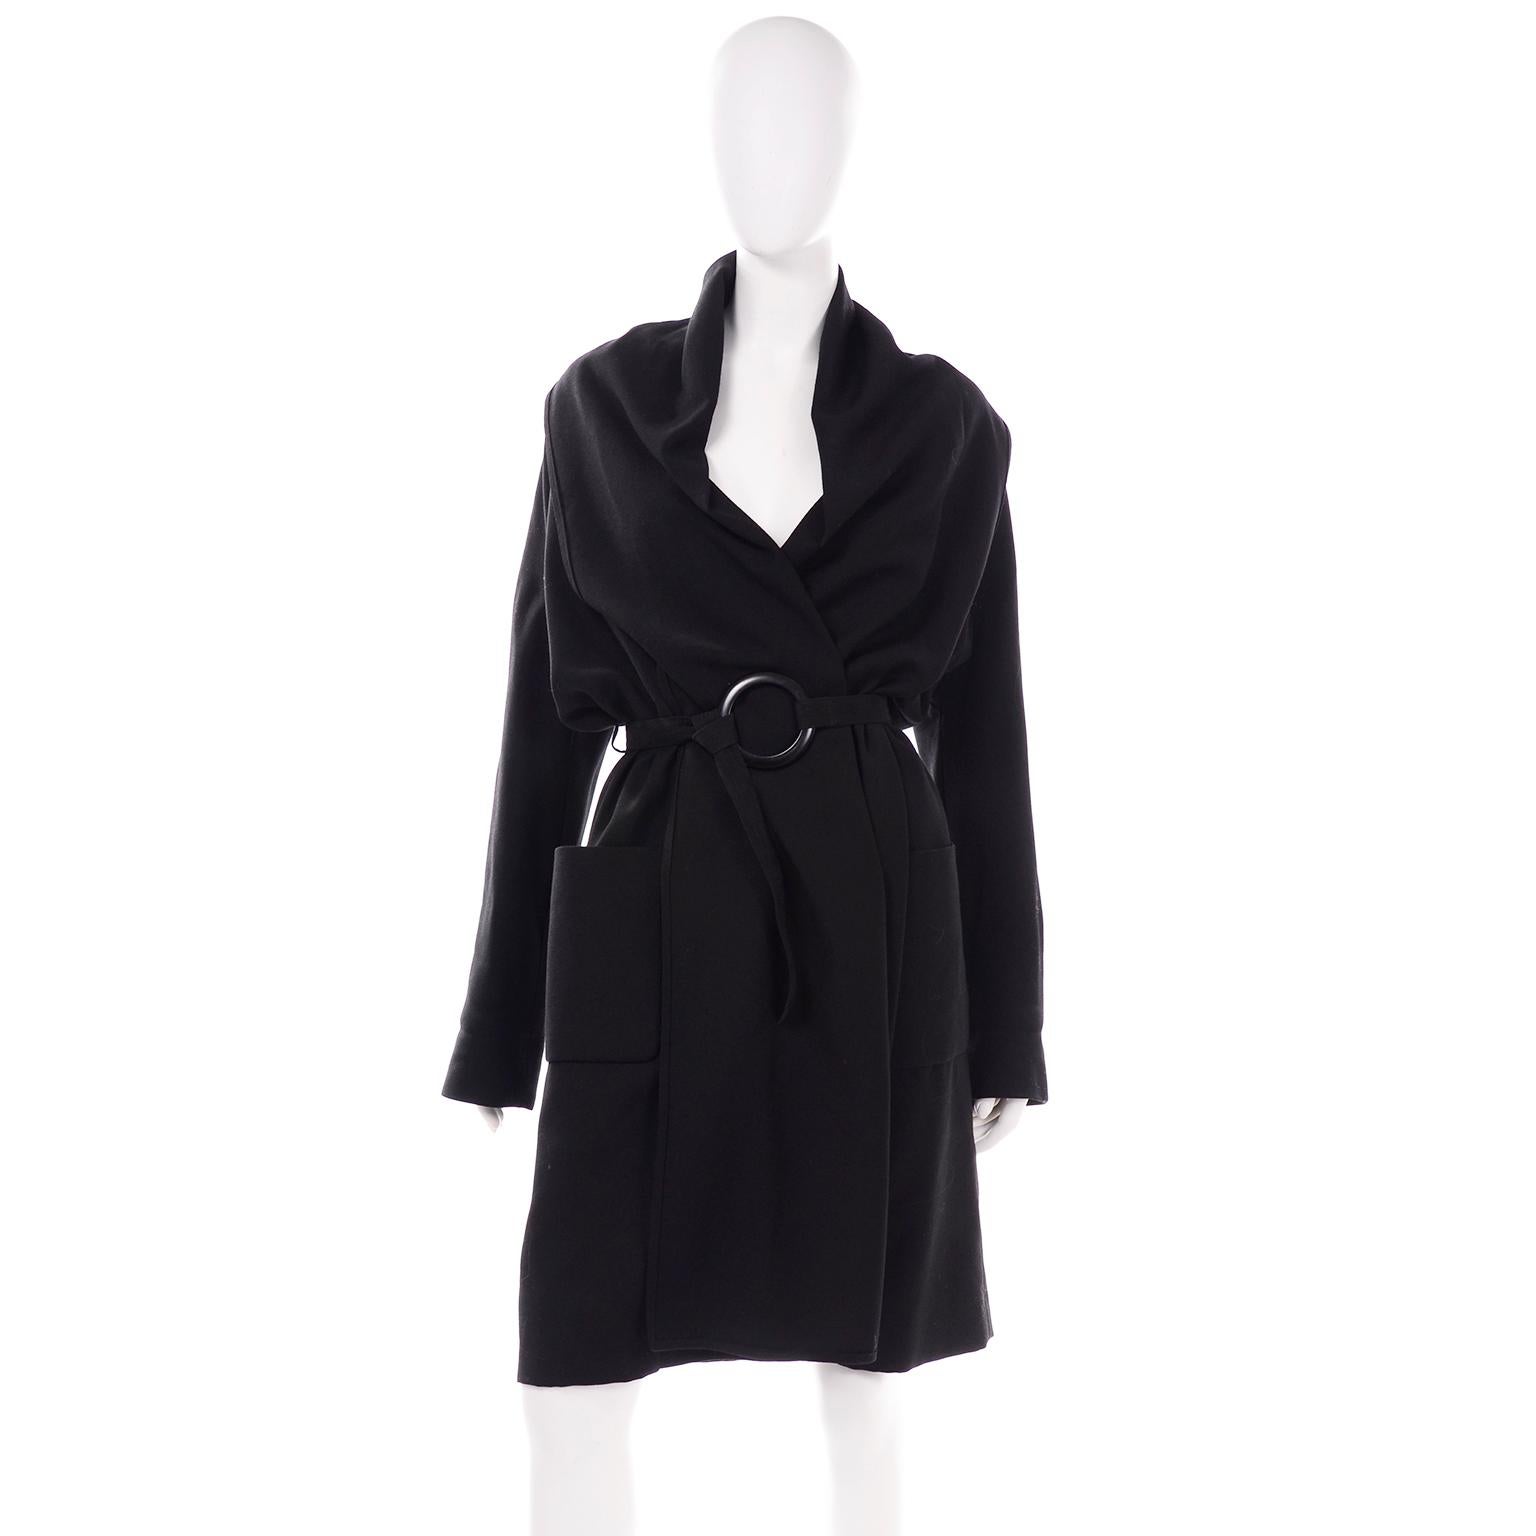 This is a beautiful black wool wrap coat by Isaac Mizrahi, with an oversized wide shawl collar. It wraps in front and secures with a thin wool belt that ties around a large circular buckle. This is a lighter weight wool, and would make an excellent